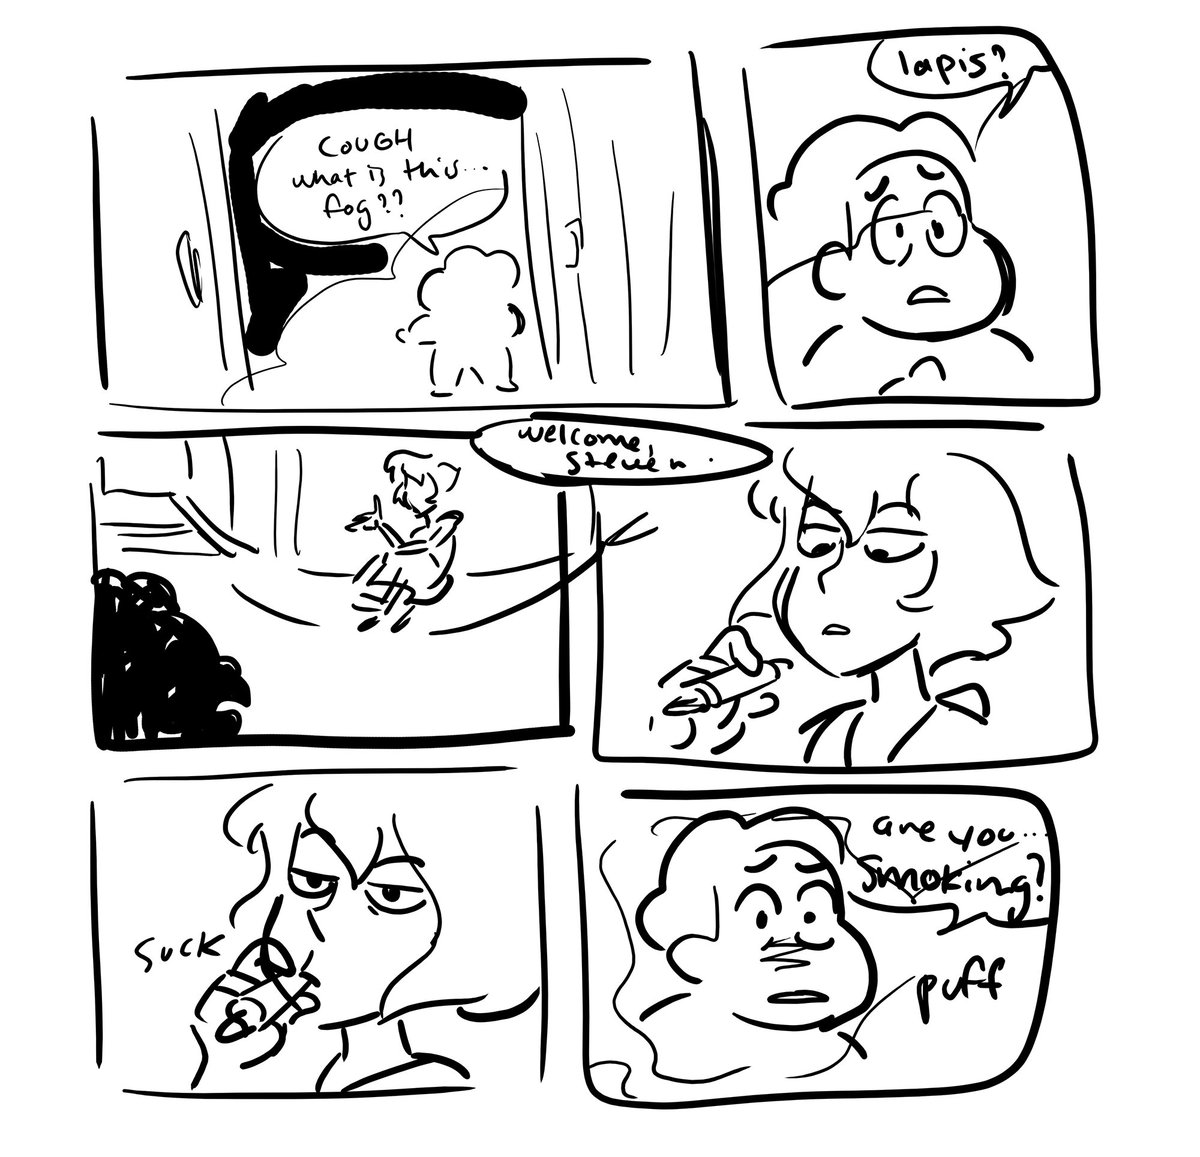 behold my stream of consciousness comic drawing 